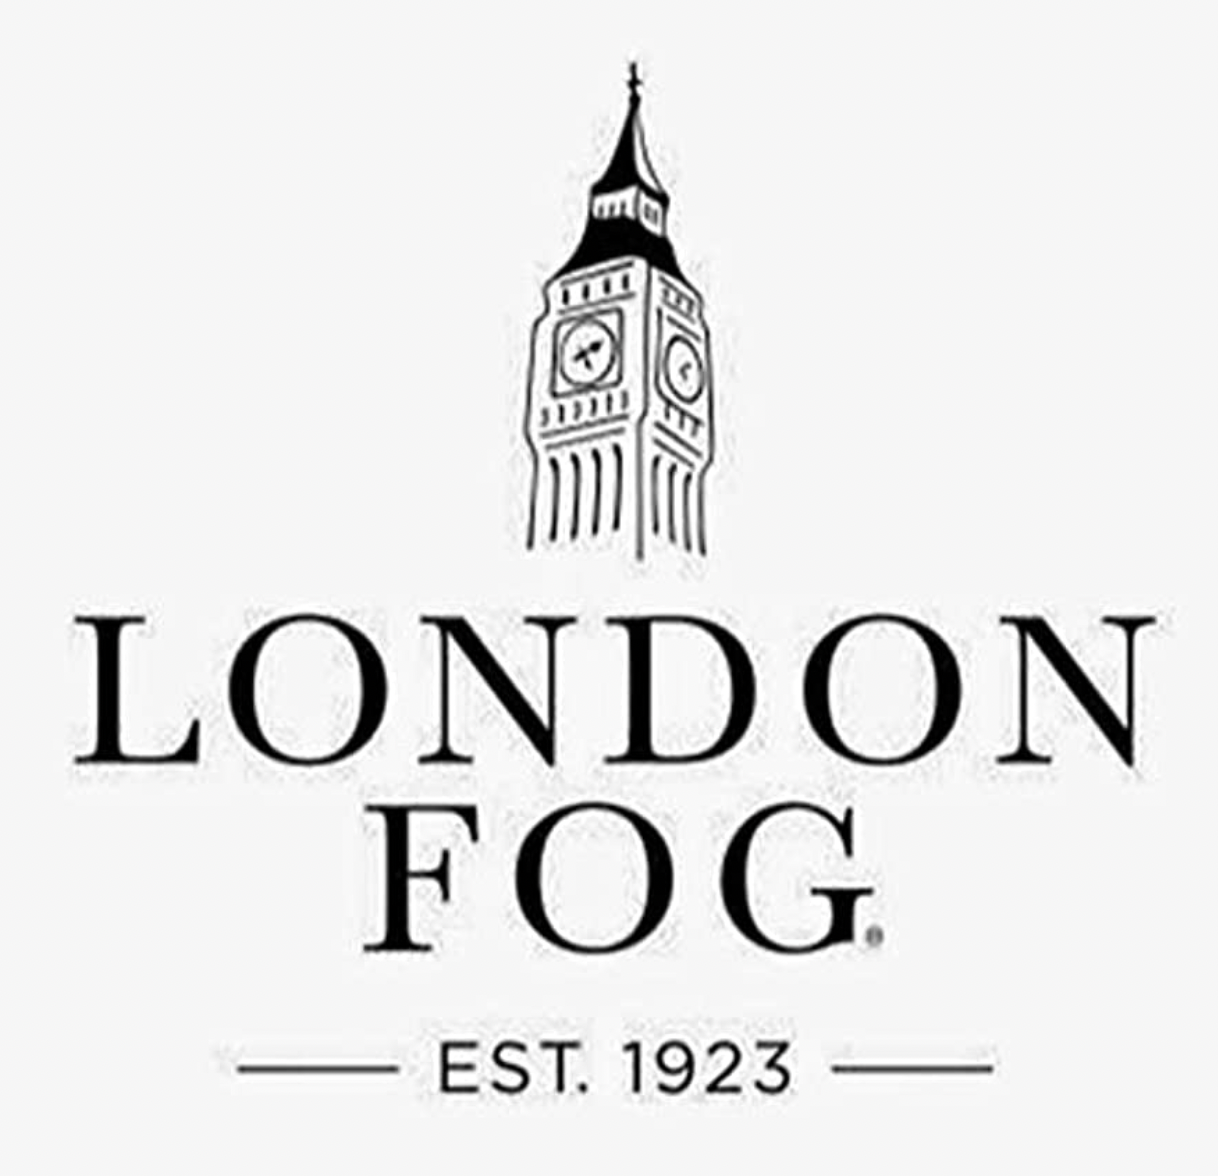 London Fog Luggage: Timeless Style and Functionality